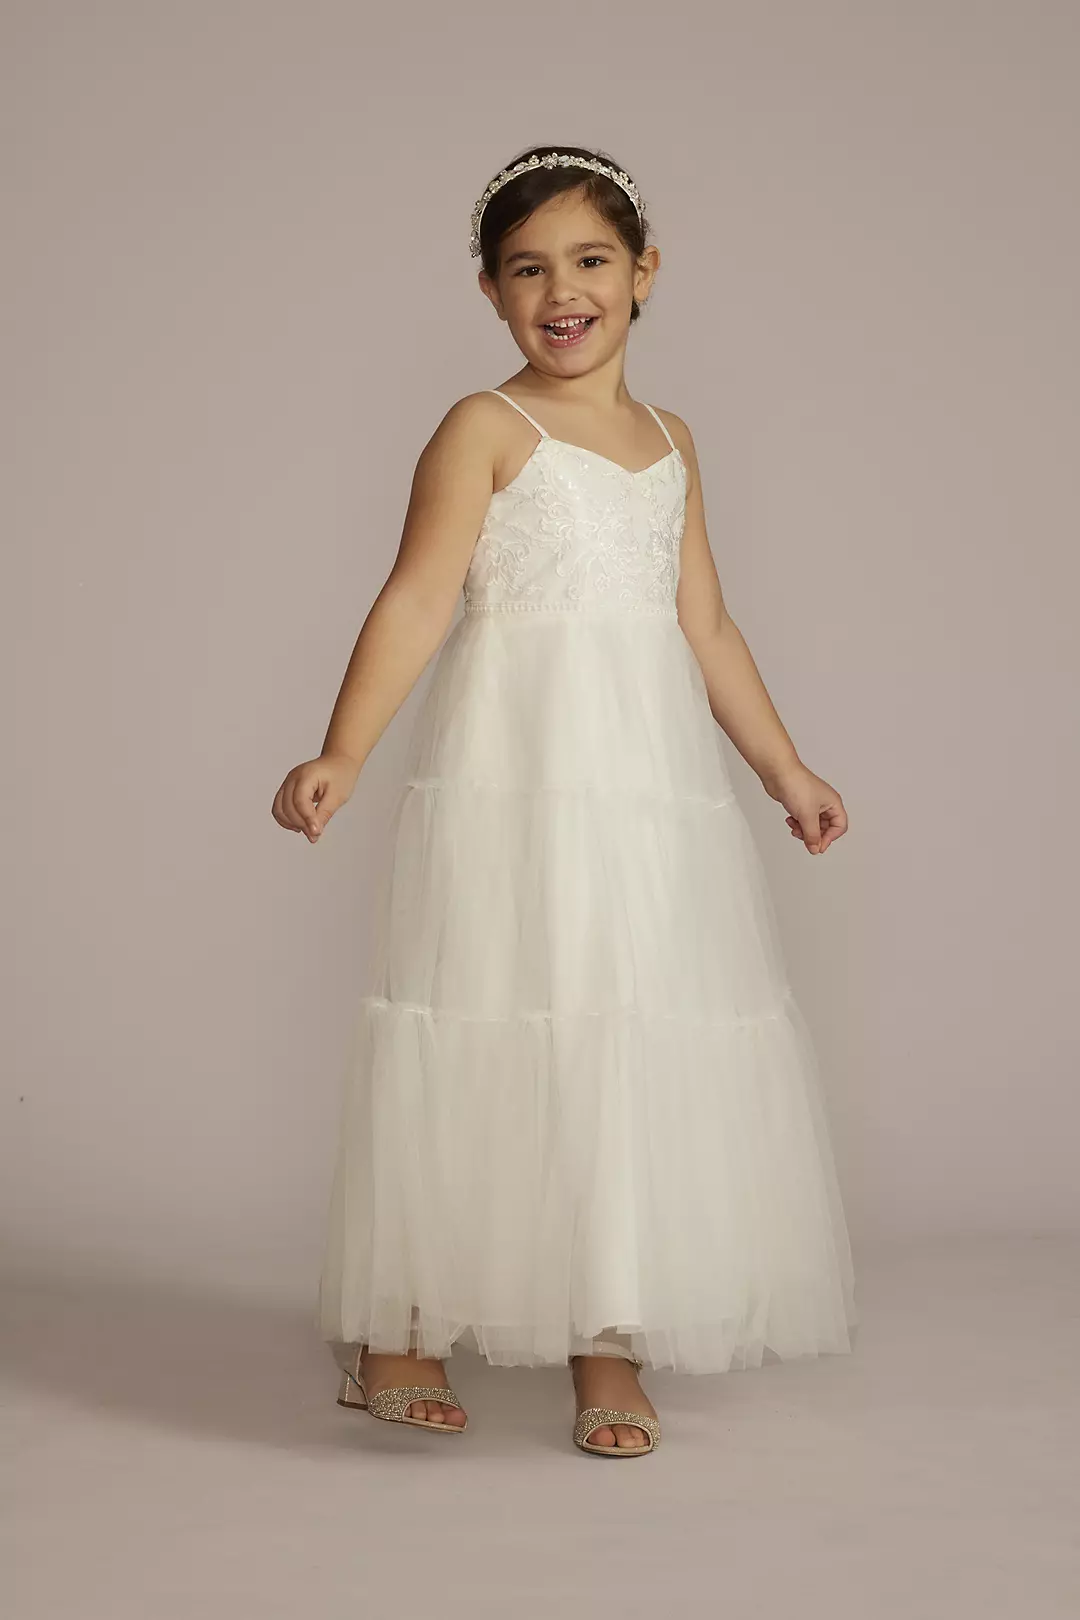 Lace and Tulle Spaghetti Strap Flower Girl Dress Image